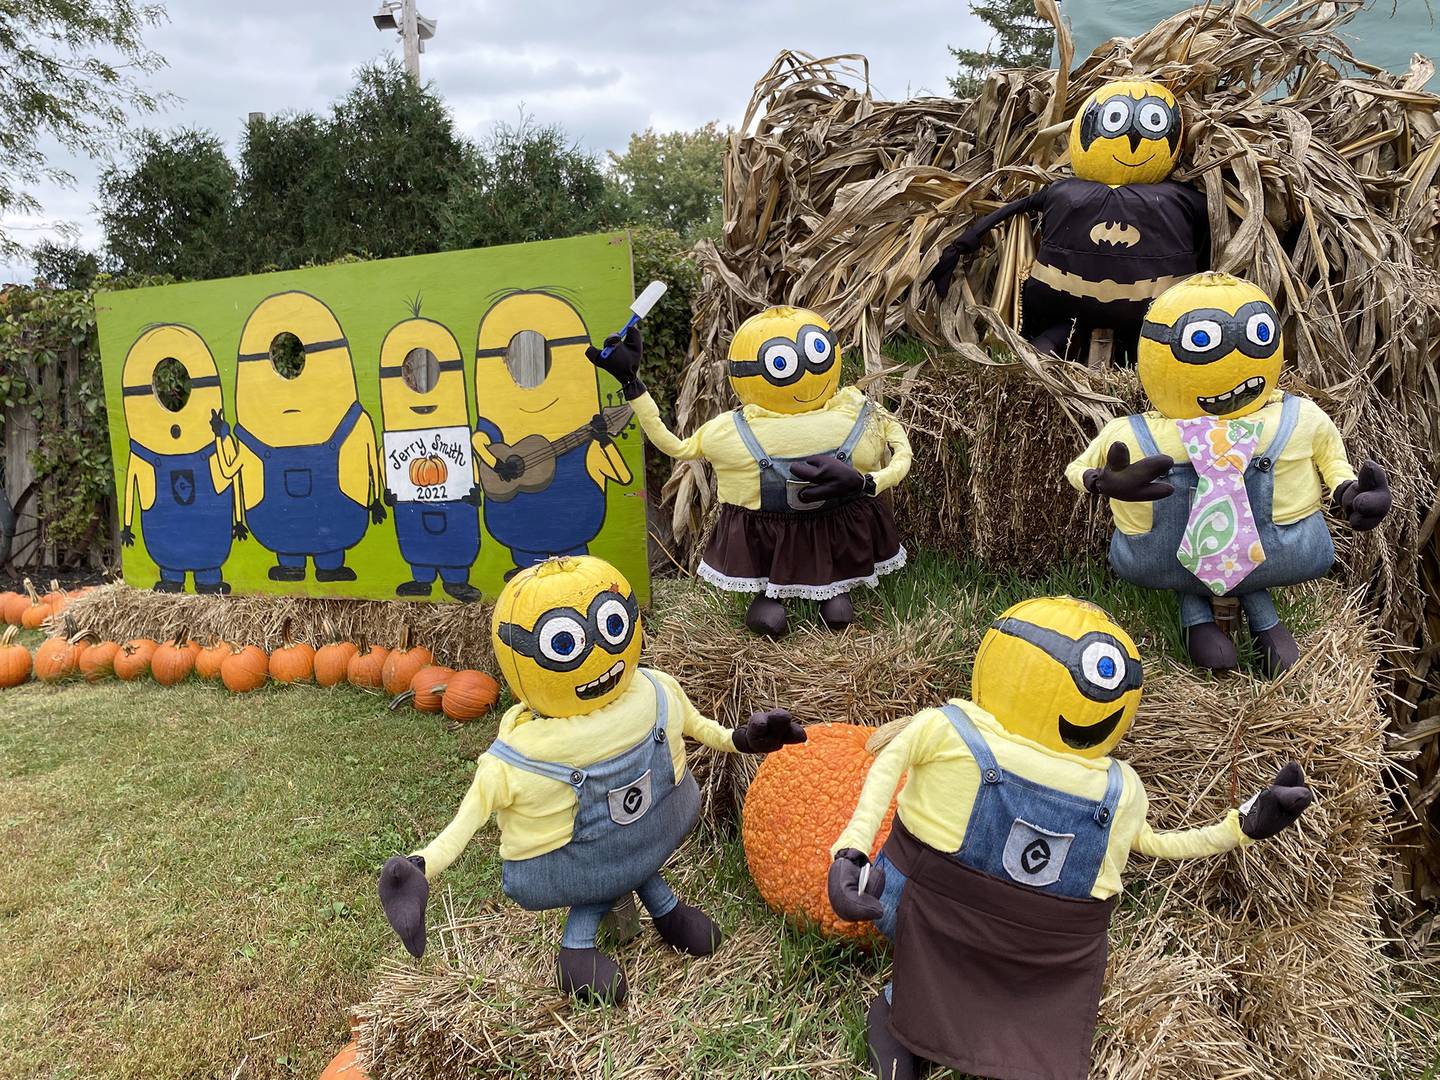 Visitors can take photos with handmade characters from the "Minions: The Rise of Gru" movie that feature painted pumpkins for heads at Jerry Smith Farm, 7150 18th Street in Kenosha.